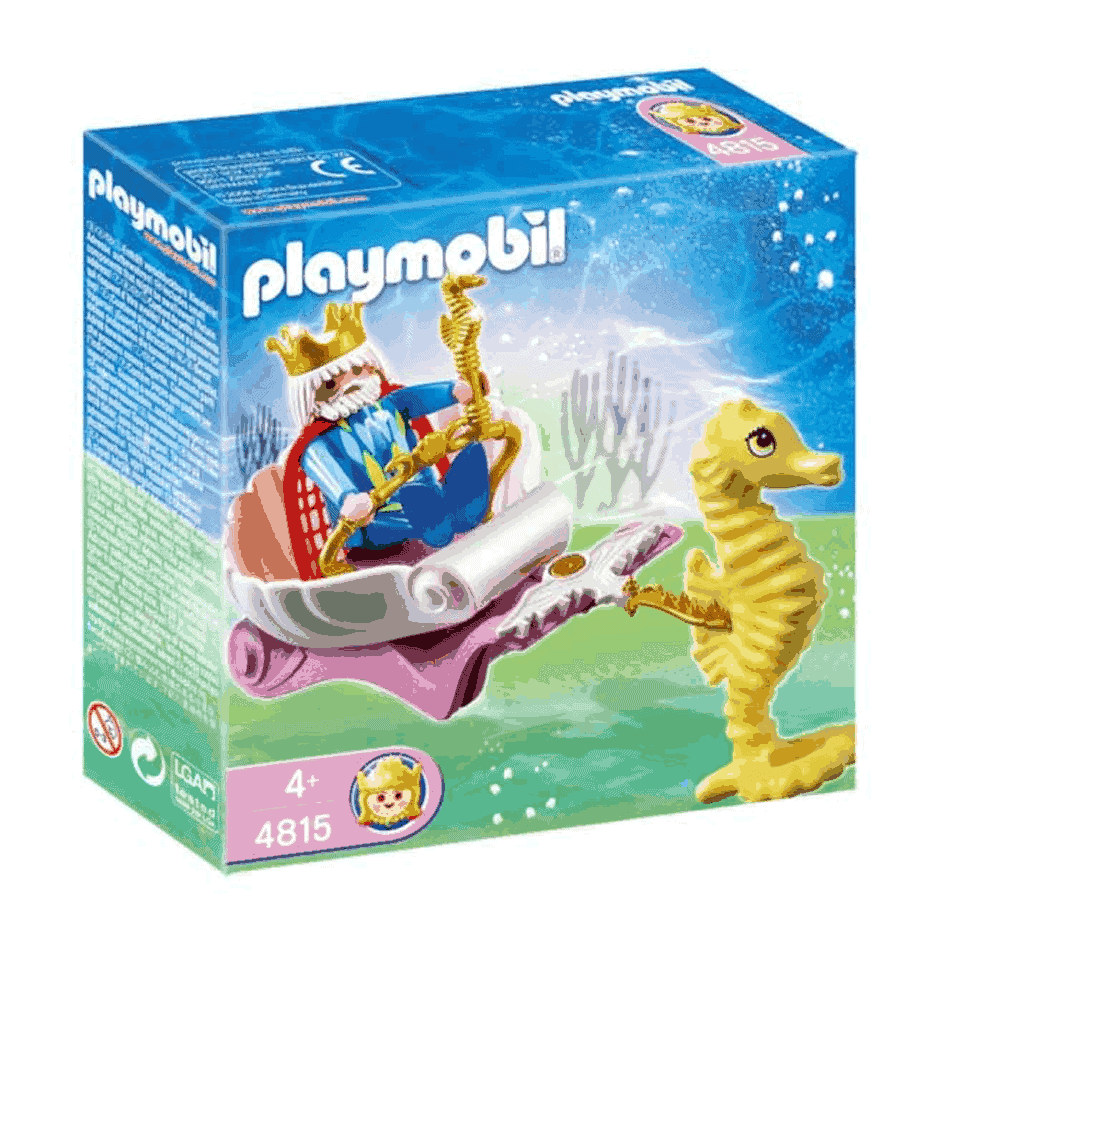 Playmobil - King Neptune With Seahorse Carriage - Ποσειδώνας Με Ιππόκαμπο